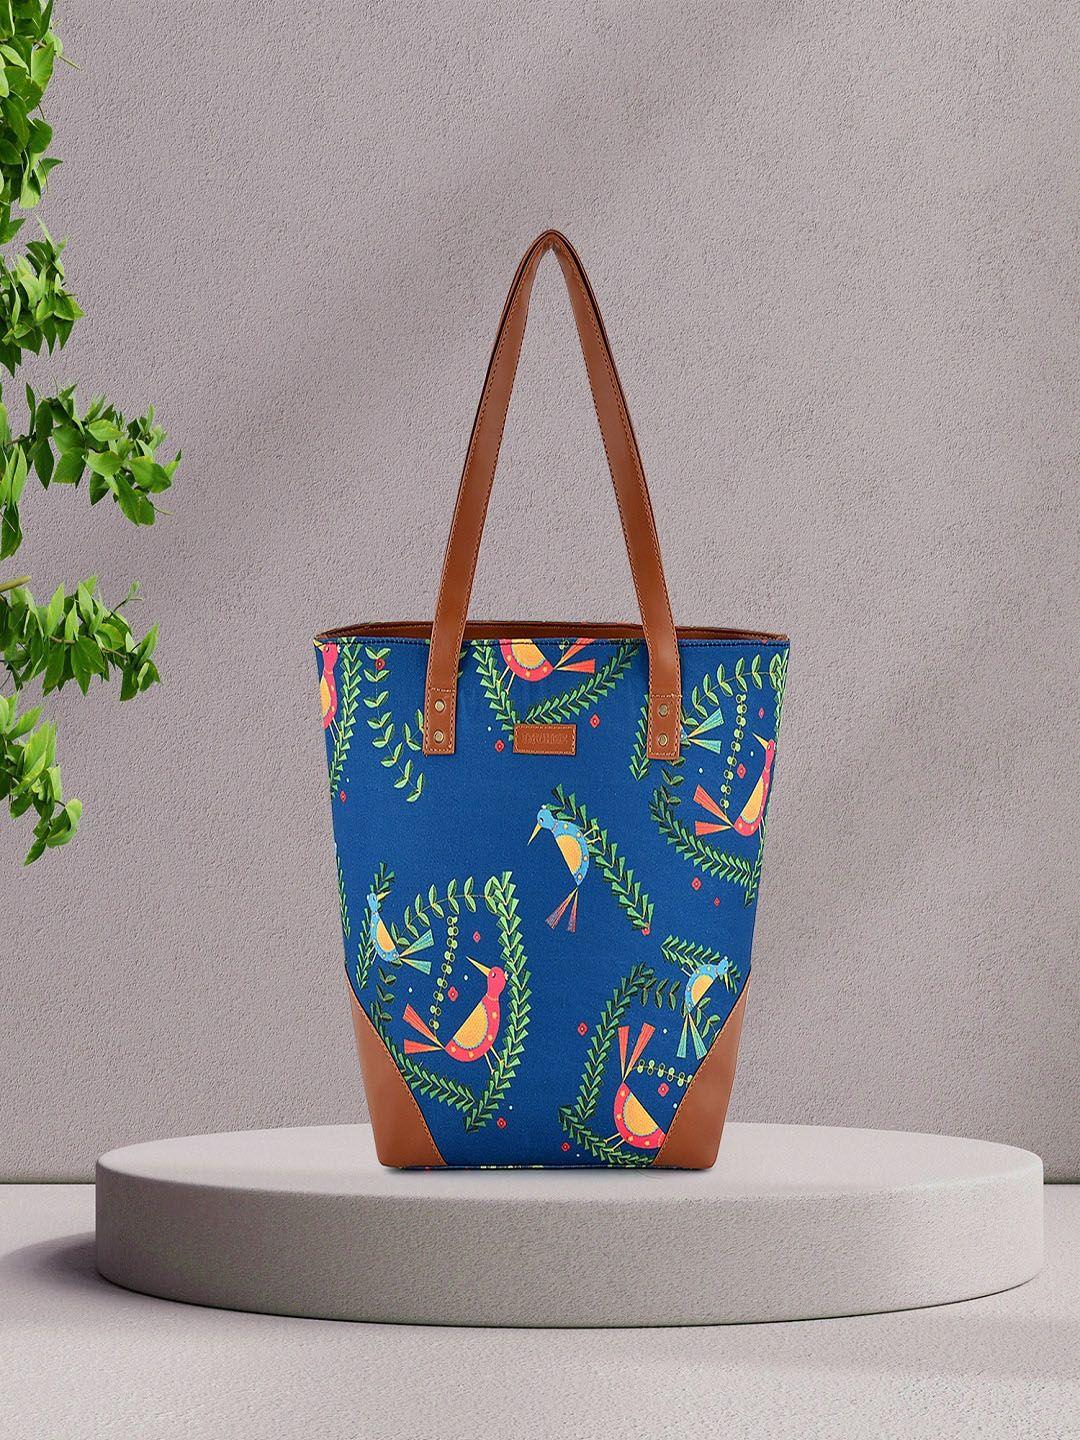 lychee bags blue printed oversized shopper tote bag